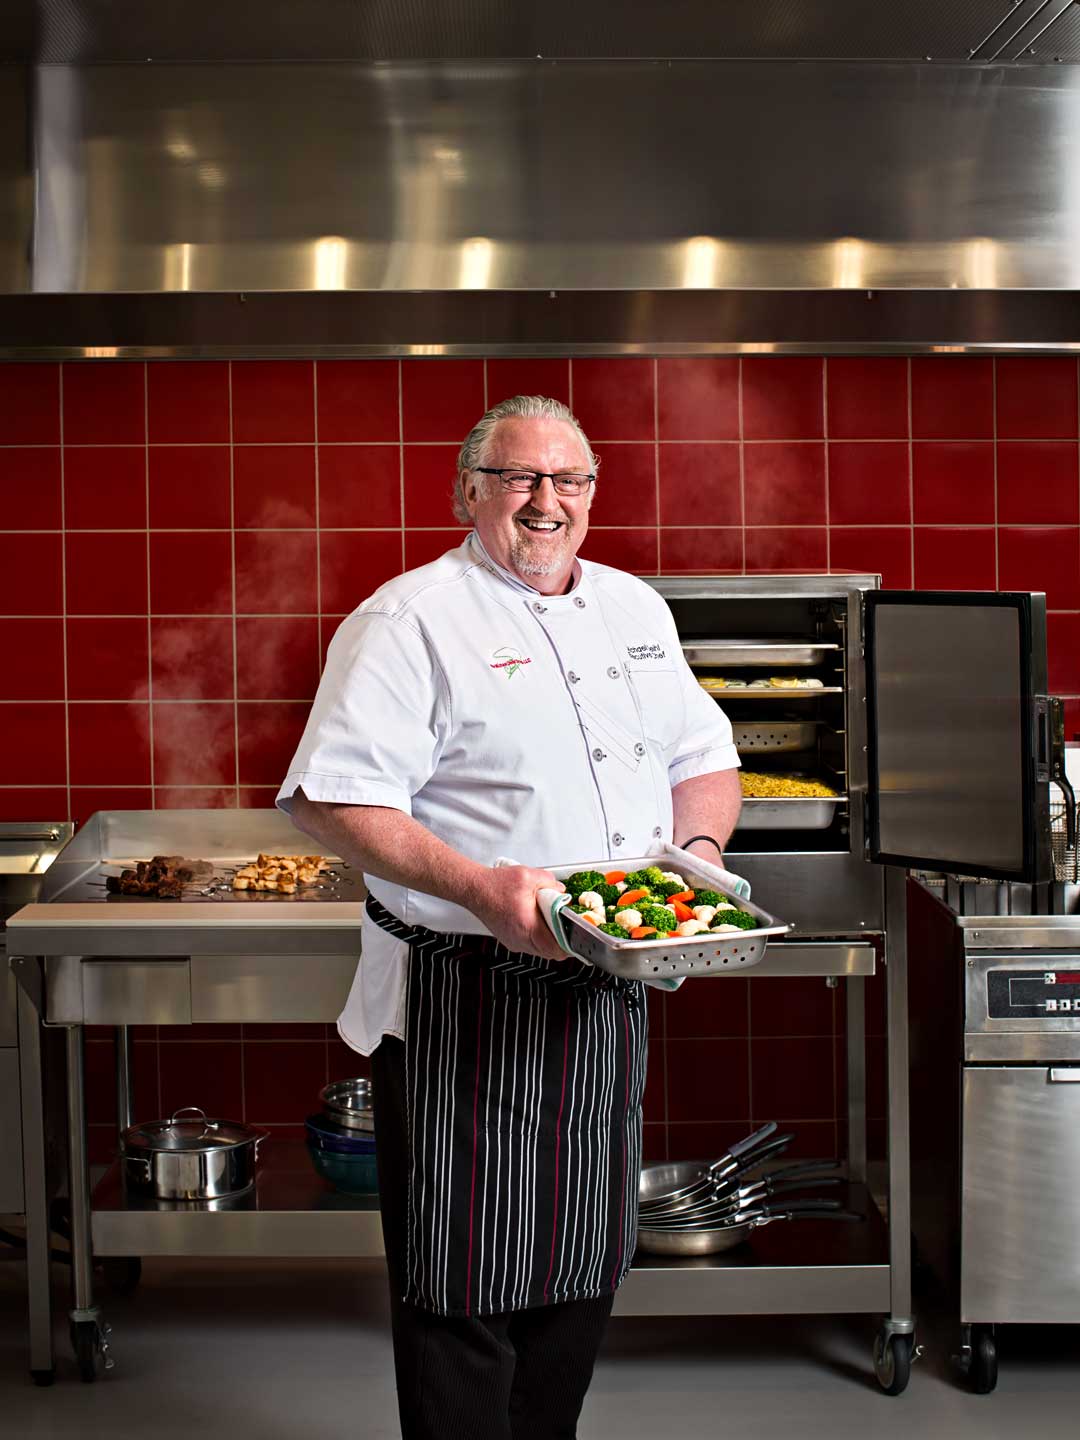 Chef stands in commercial kitchen with tray of food, Atlanta photography